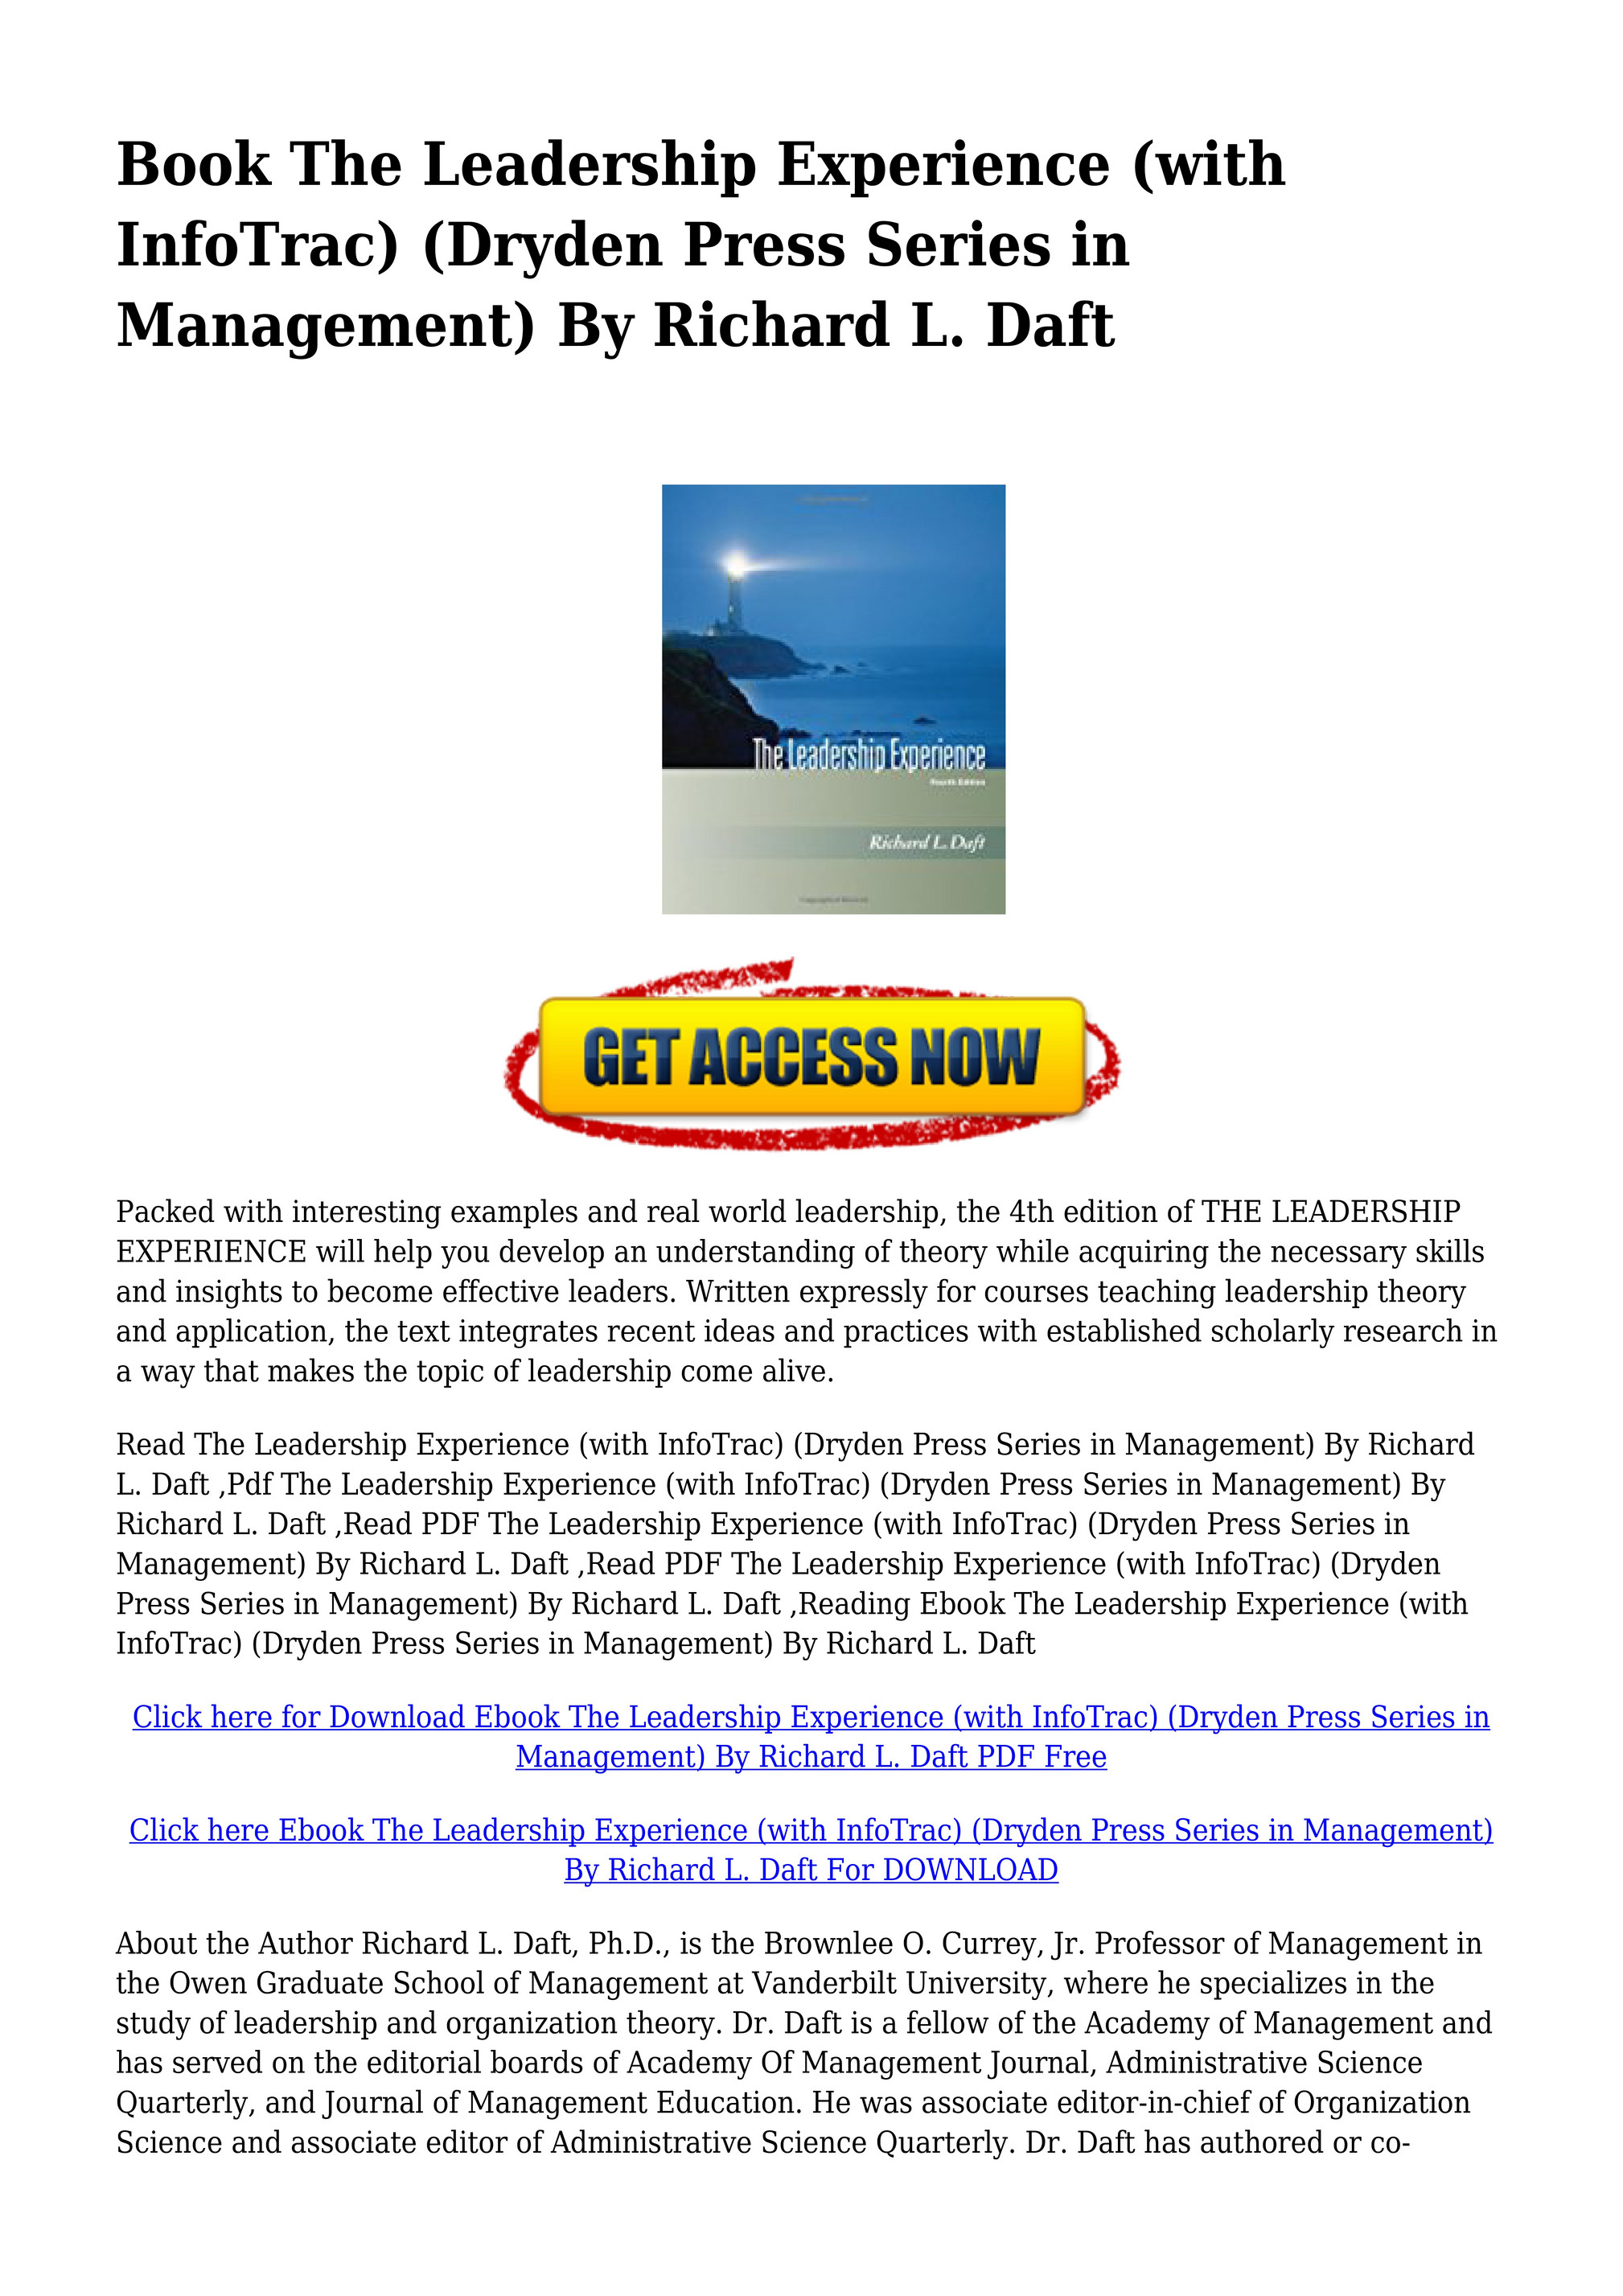 the leadership experience daft pdf free download